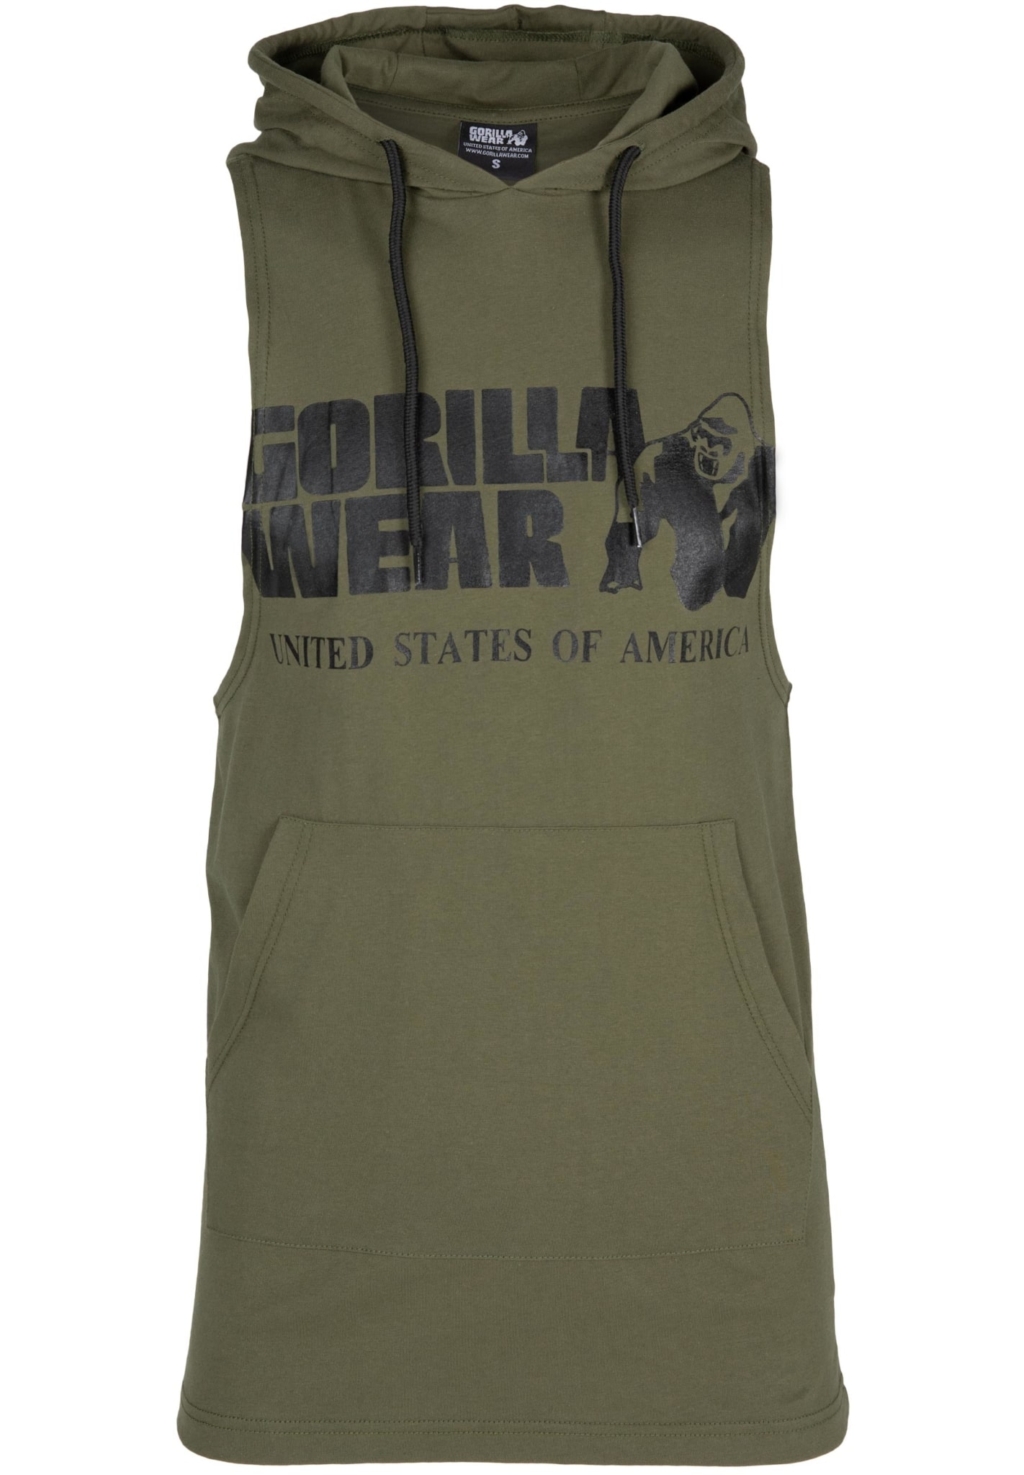 90127400 rogers hooded tank top army green 01 scaled